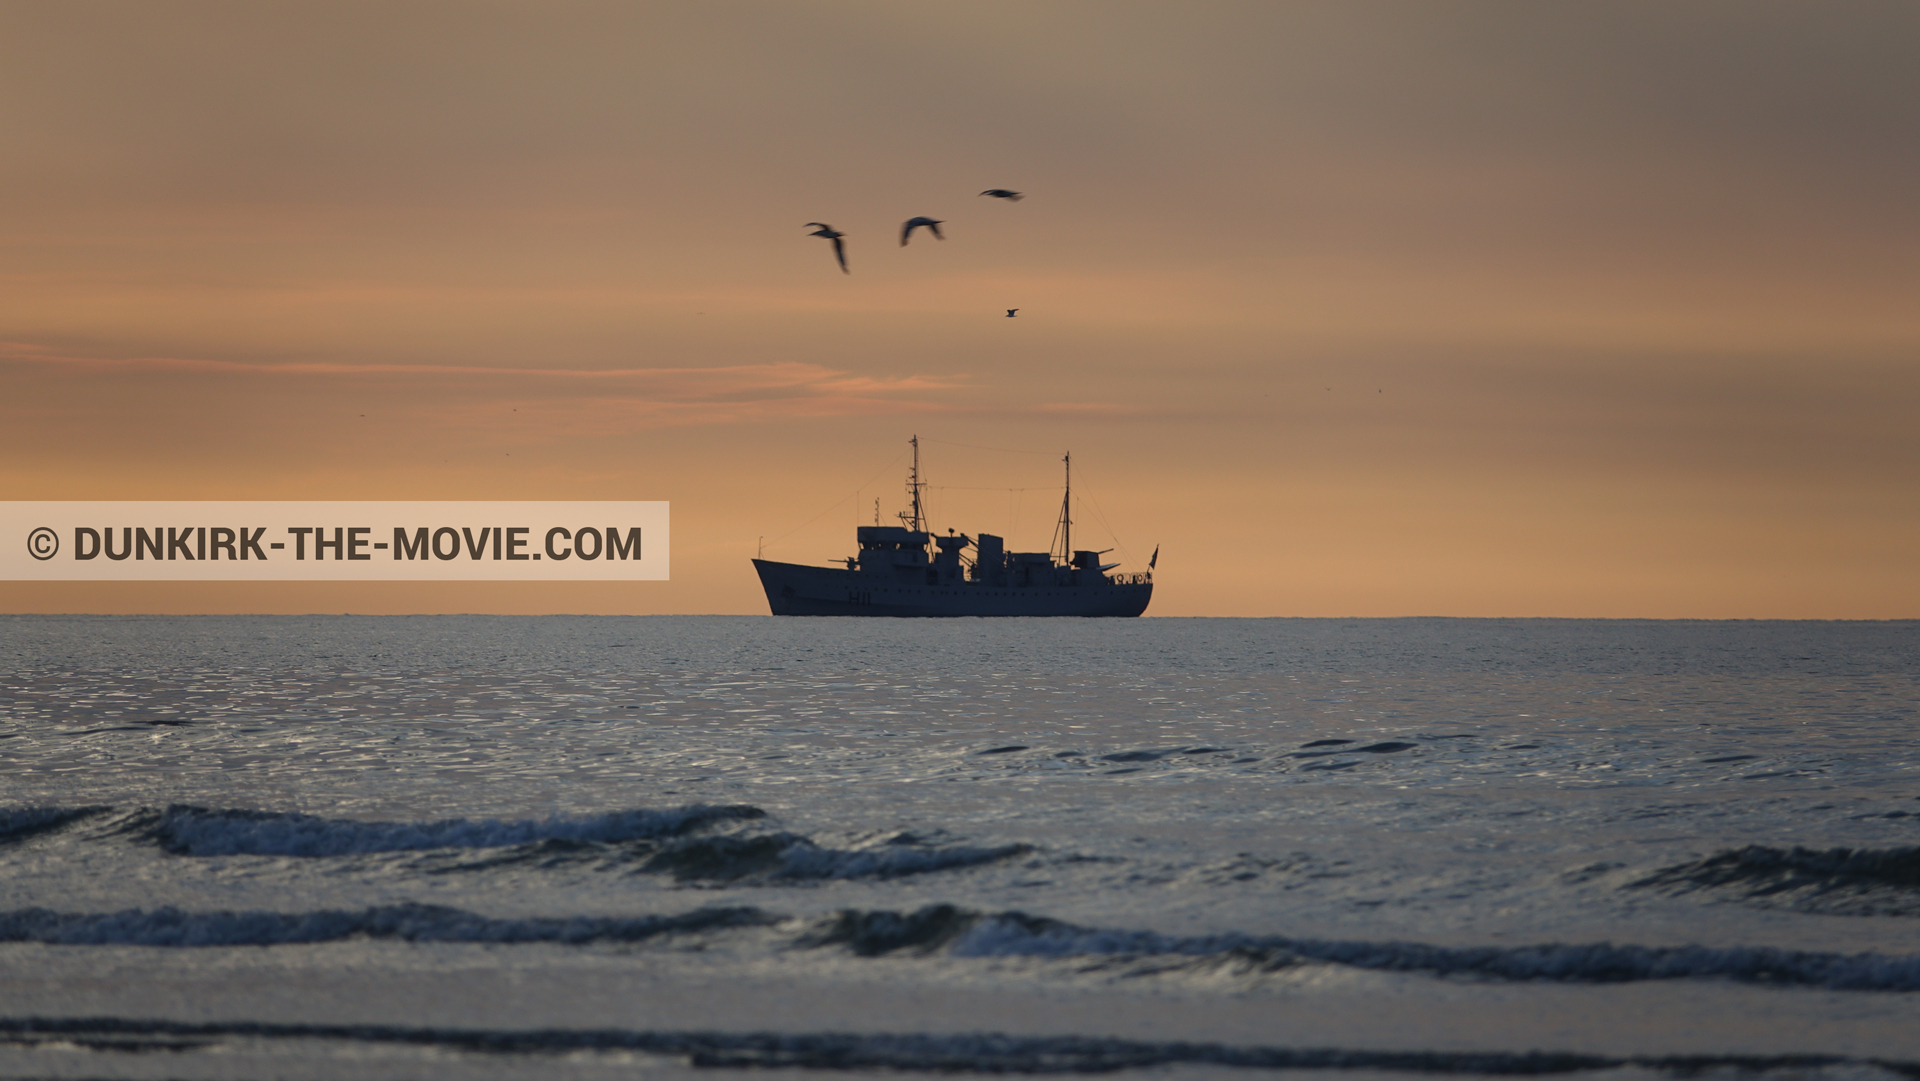 Picture with boat, orange sky, calm sea, H11 - MLV Castor,  from behind the scene of the Dunkirk movie by Nolan